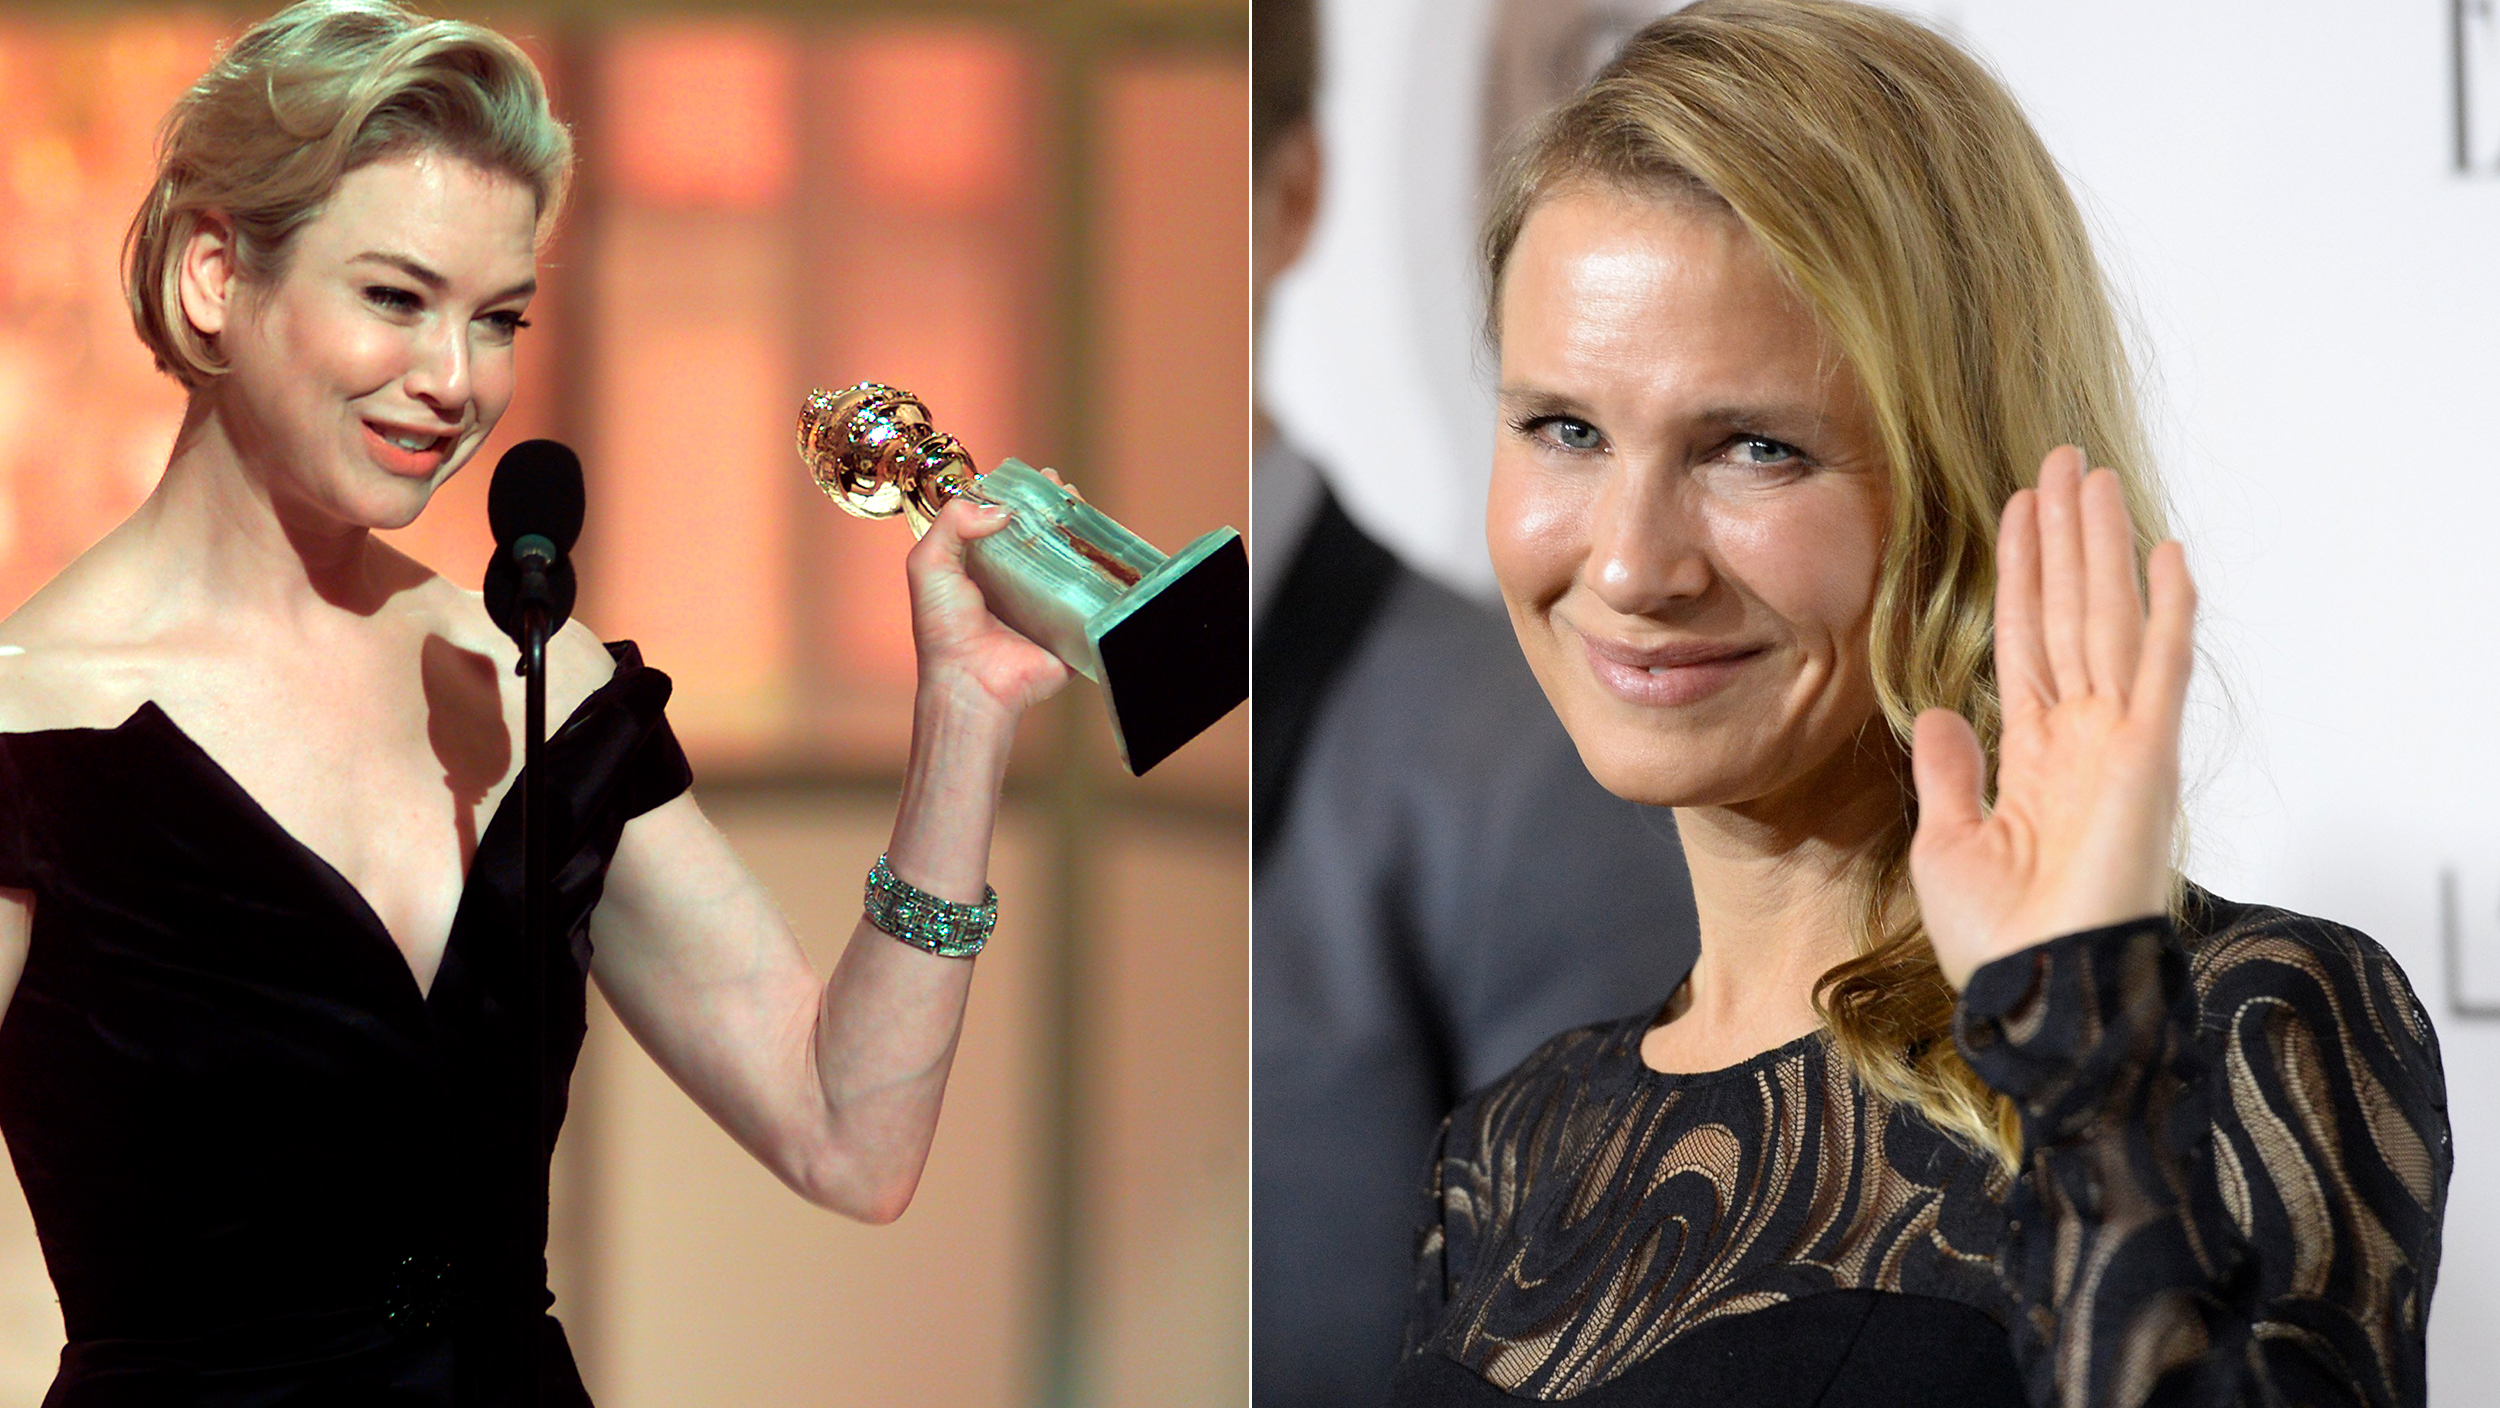 Renee Zellweger 'glad' people think she looks 'different' - TODAY.com